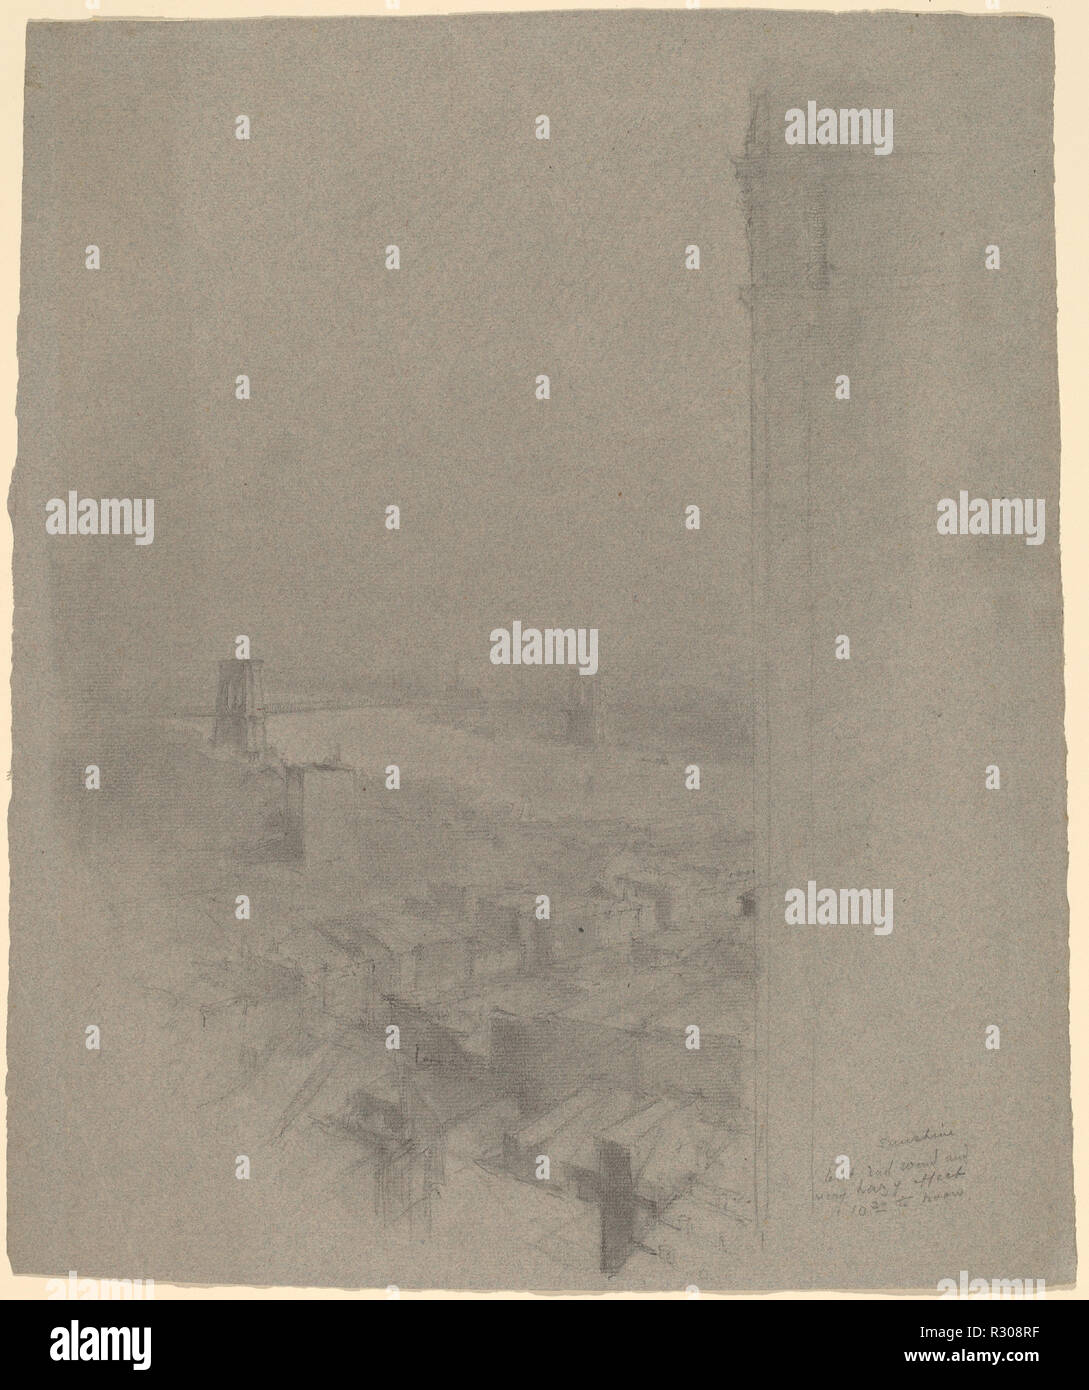 Manhattan Bridge. Dimensions: overall (approximate): 37.5 x 31.6 cm (14 3/4 x 12 7/16 in.). Medium: graphite on blue-gray laid paper. Museum: National Gallery of Art, Washington DC. Author: Stanford White. Stock Photo